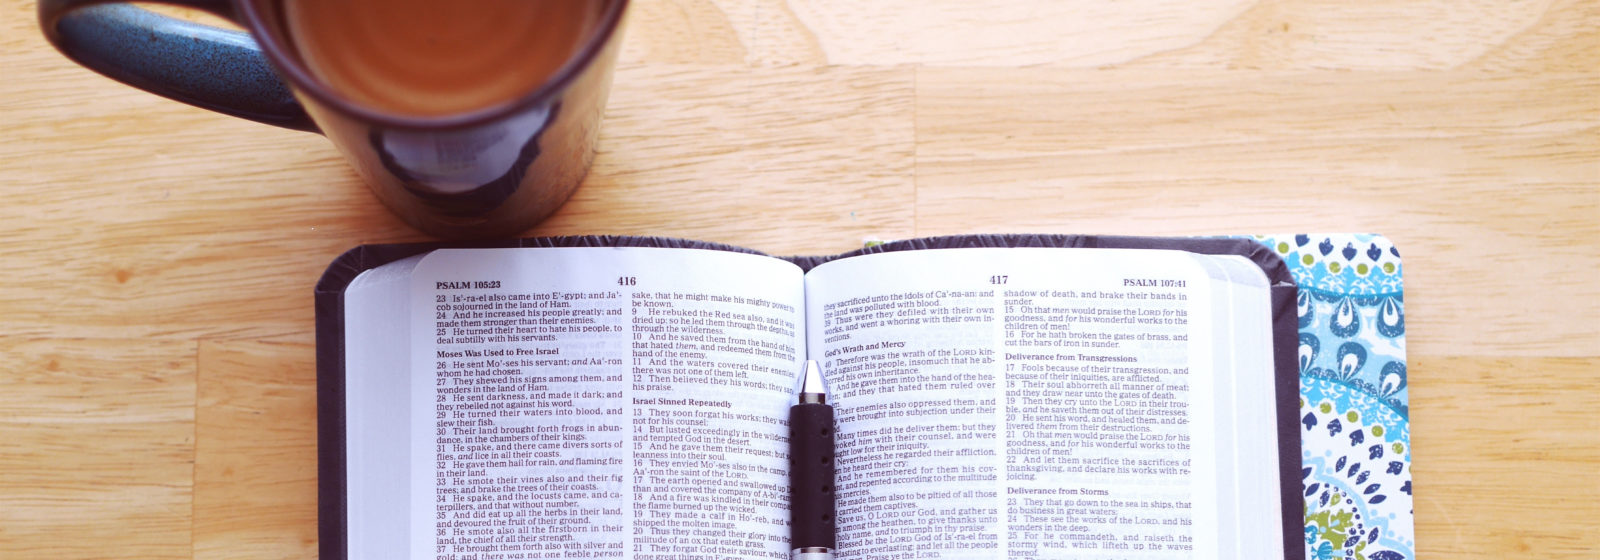 studying bible for students